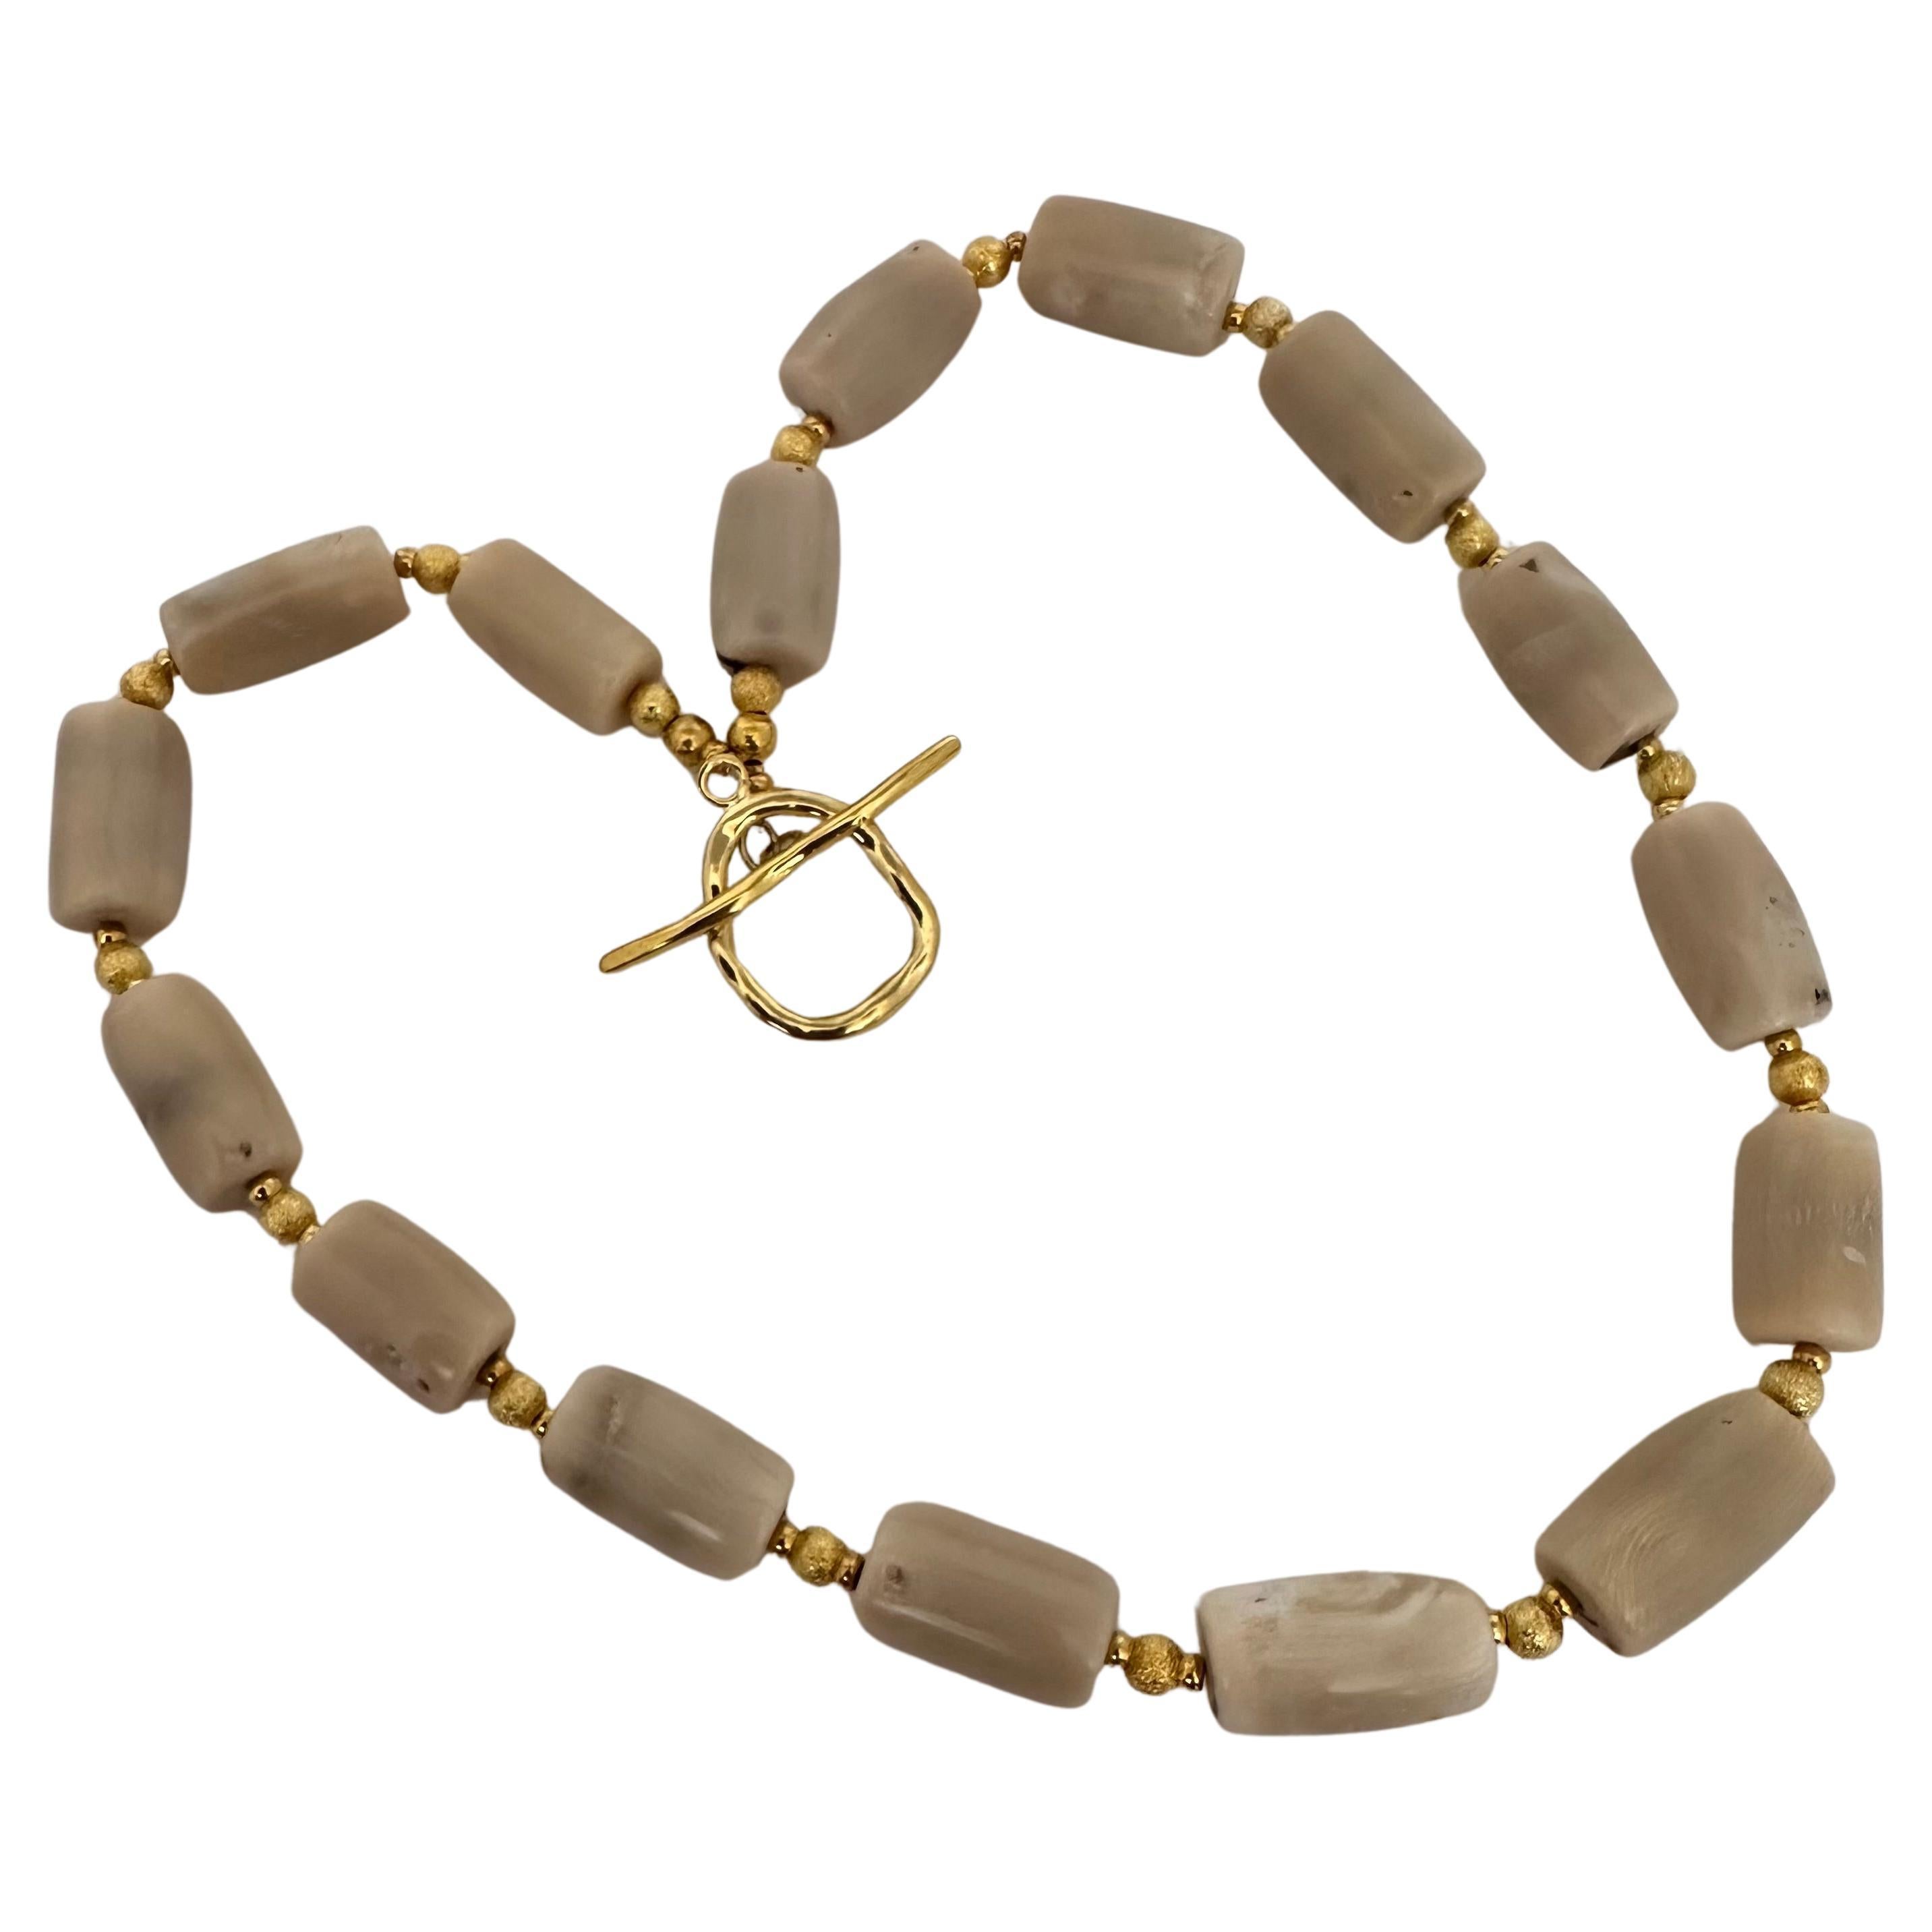 Handmade ~ Gold Beads & White/Beige Coral Barrel Shaped Beaded 27" Necklace C44 For Sale